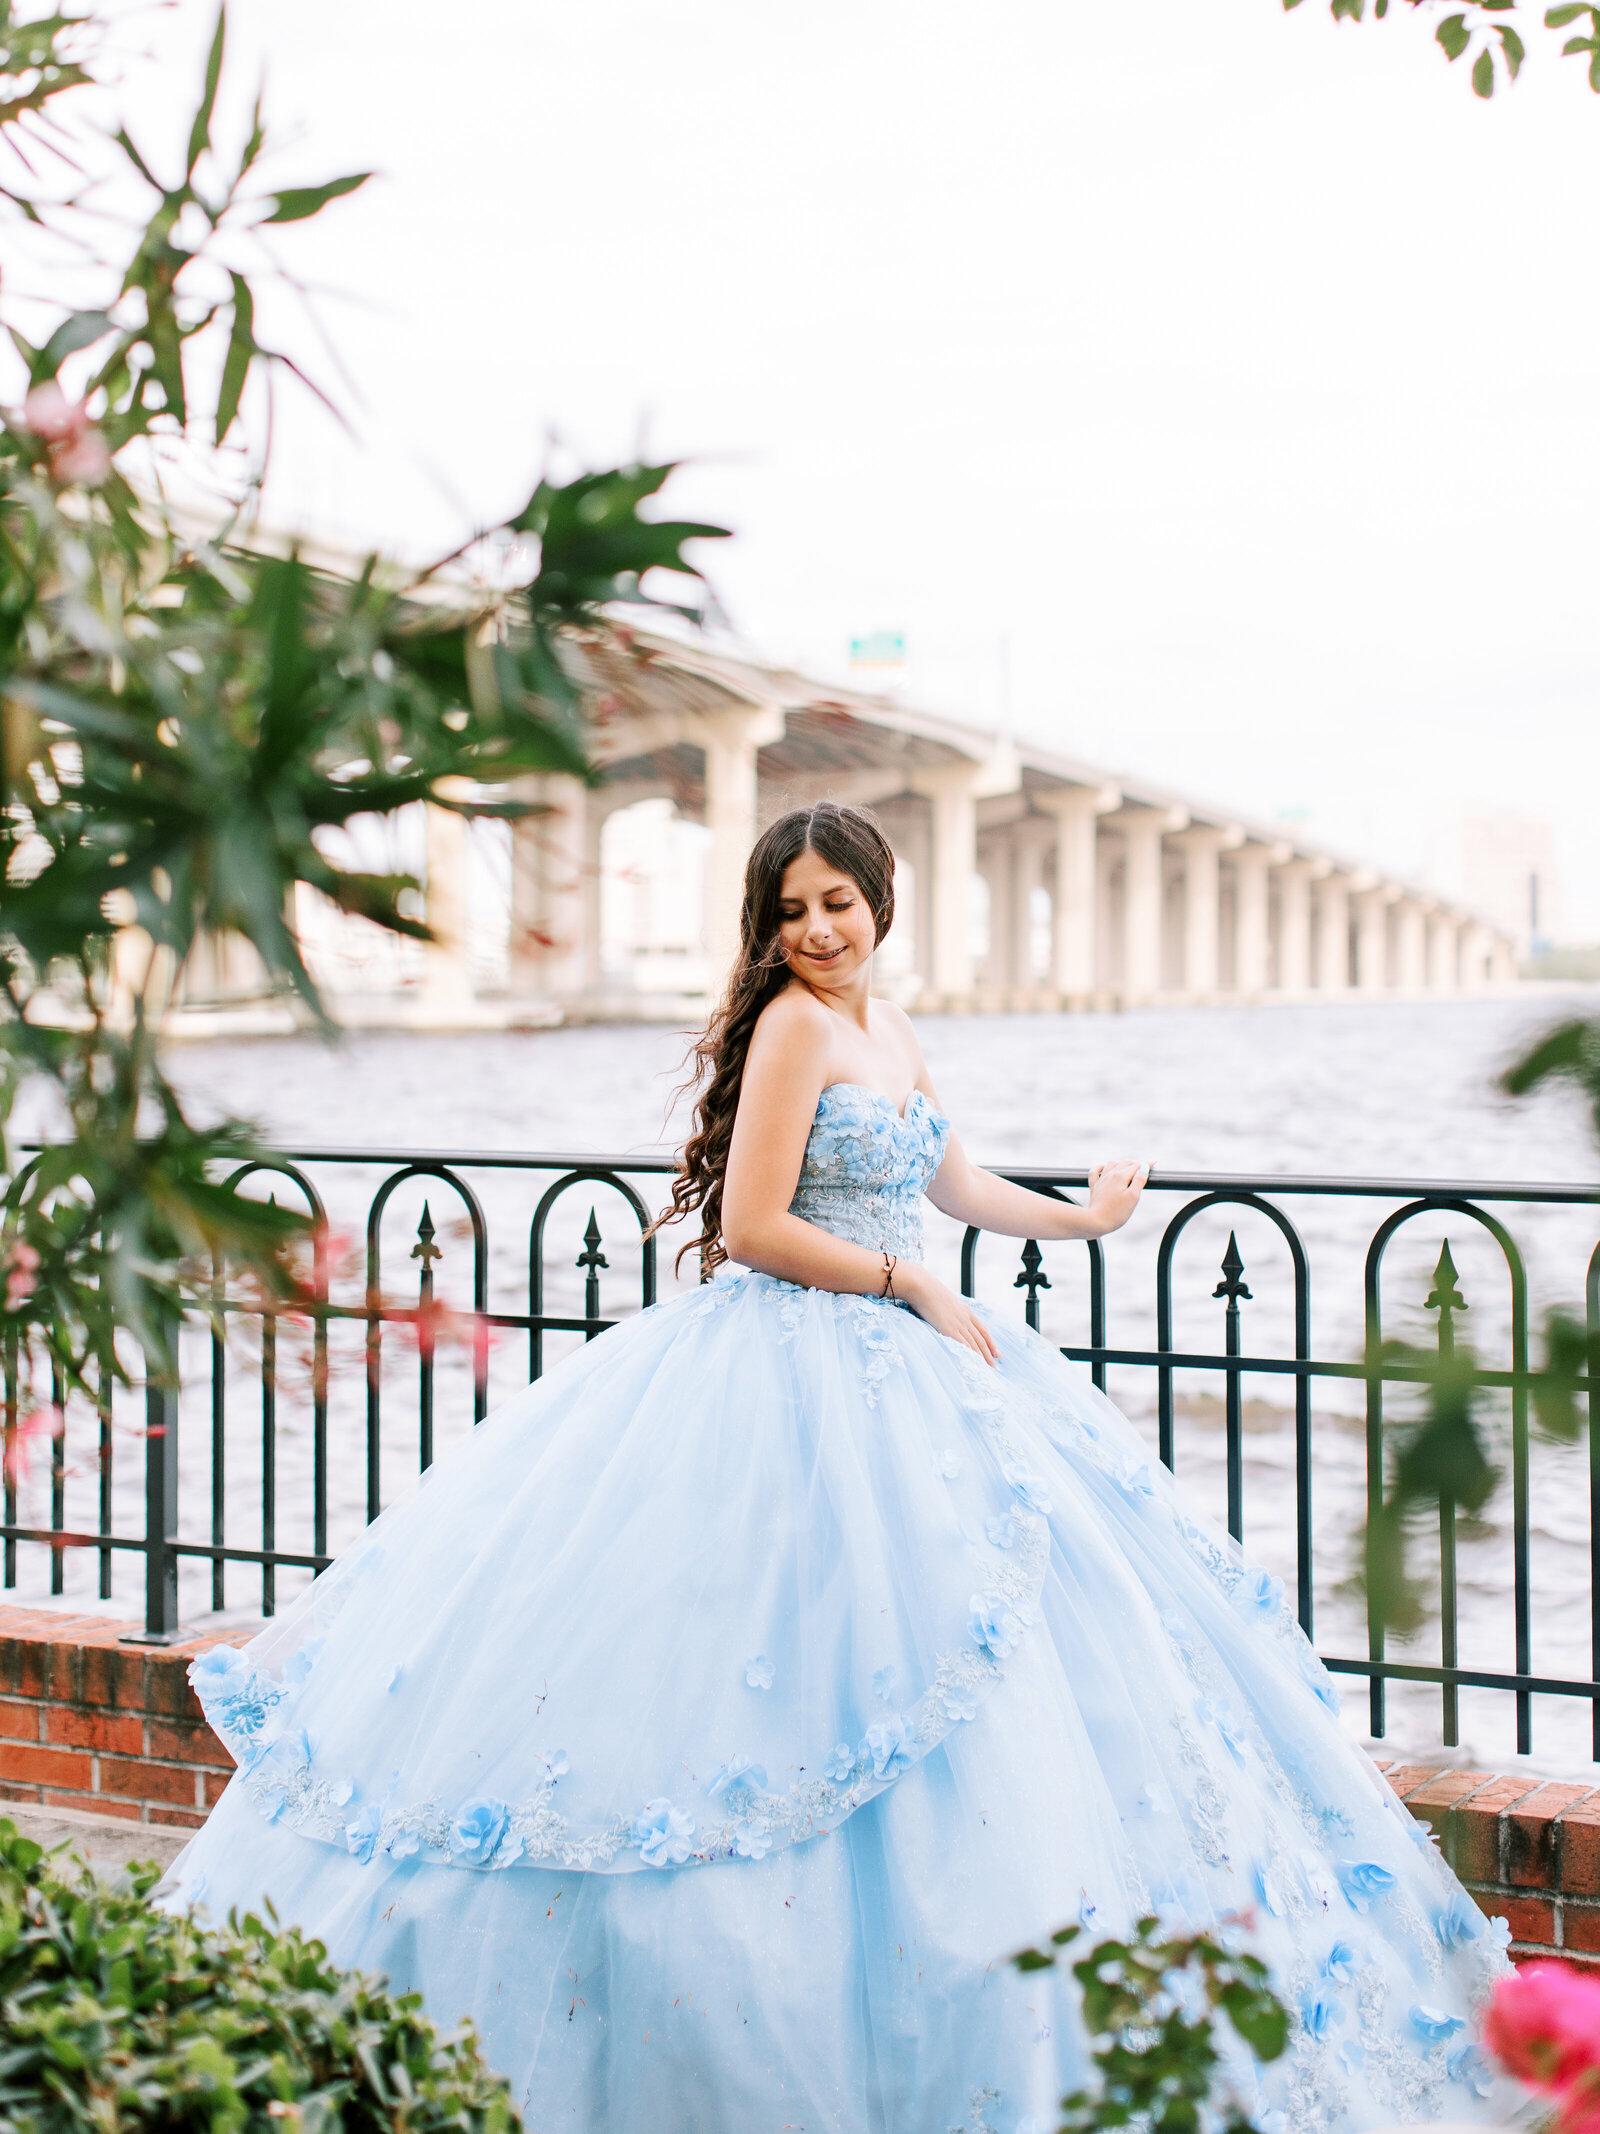 captured by lau photography llc. Mias Quince photos at the cummer museum. Jax Quinceanera photographer -2853